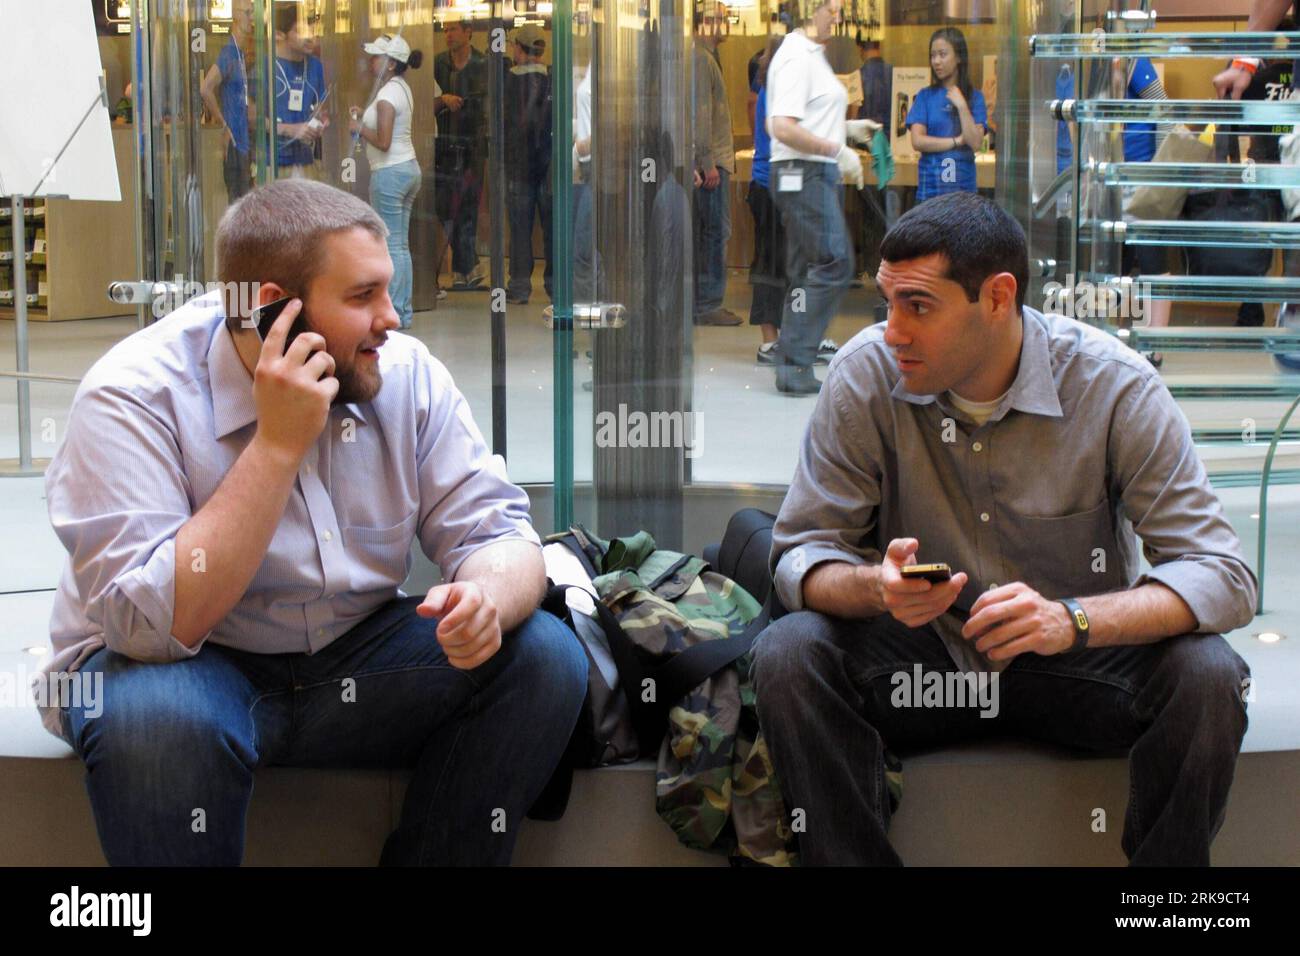 Bildnummer: 54169002  Datum: 24.06.2010  Copyright: imago/Xinhua NEW YORK, June 24, 2010 (Xinhua) -- Two men talk about their new iPhone4 at Manhattan s 5th avenue Apple Store in New York, the United States, on June 24, 2010. The iPhone 4 on Thursday made its global debuts in the five countries of Britain, France, Germany, Japan and the United States. (Xinhua/Wu Kaixiang) (4)US-NEW YORK-APPLE IPHONE 4-LAUNCH PUBLICATIONxNOTxINxCHN Wirtschaft kbdig xkg 2010 quer o0 neu neues i phone Handy Verkauf Verkaufsstart    Bildnummer 54169002 Date 24 06 2010 Copyright Imago XINHUA New York June 24 2010 X Stock Photo